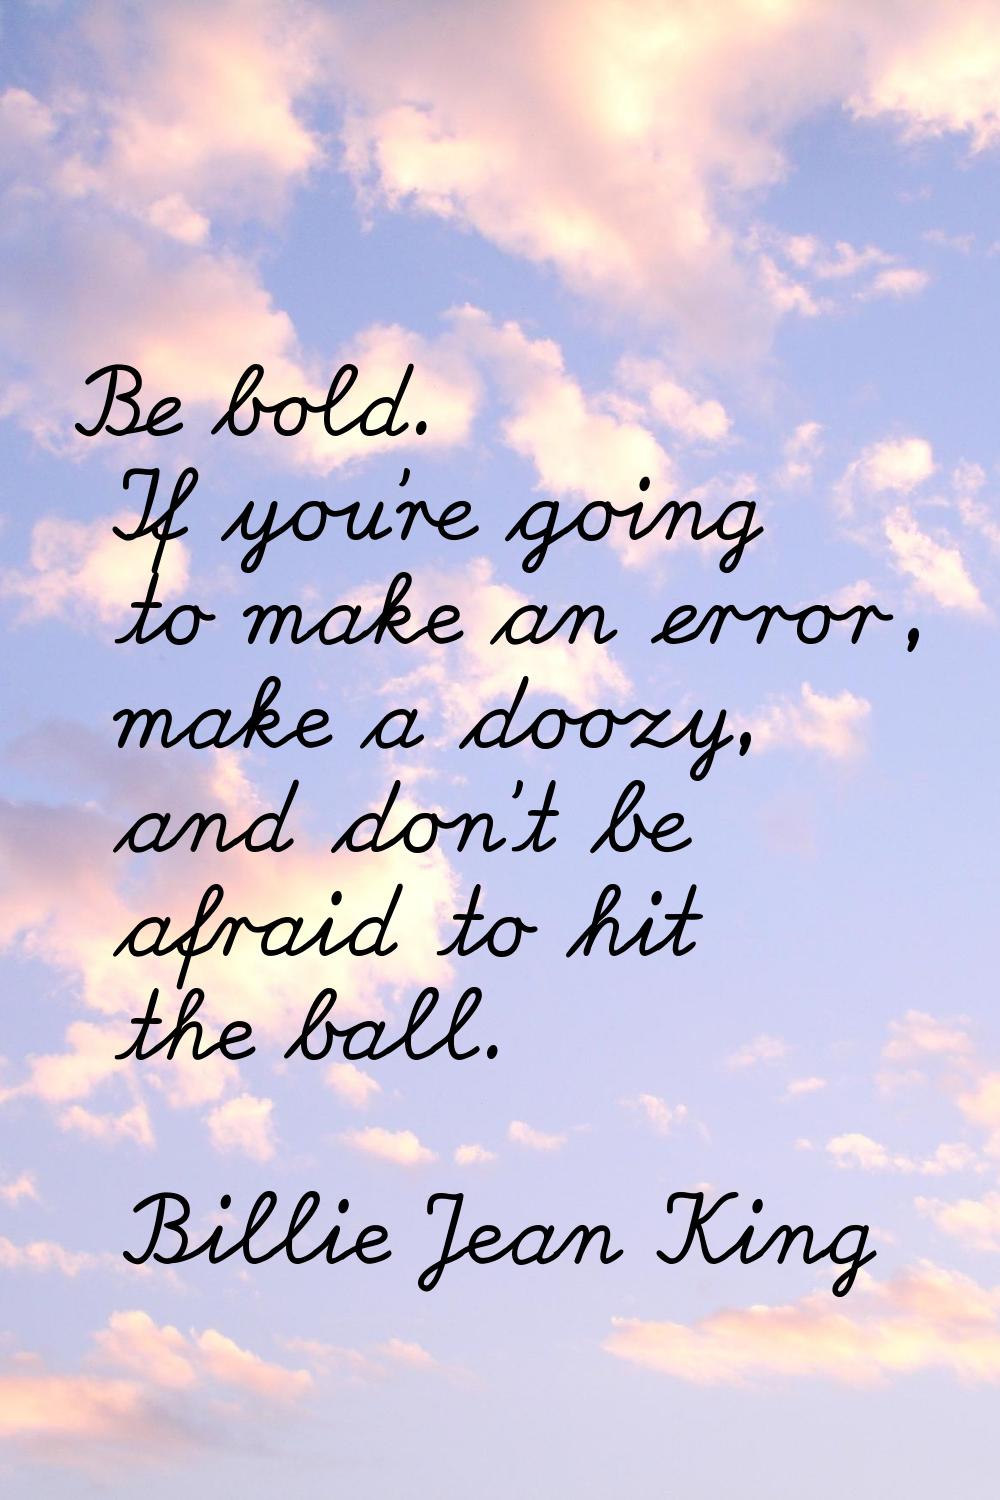 Be bold. If you're going to make an error, make a doozy, and don't be afraid to hit the ball.